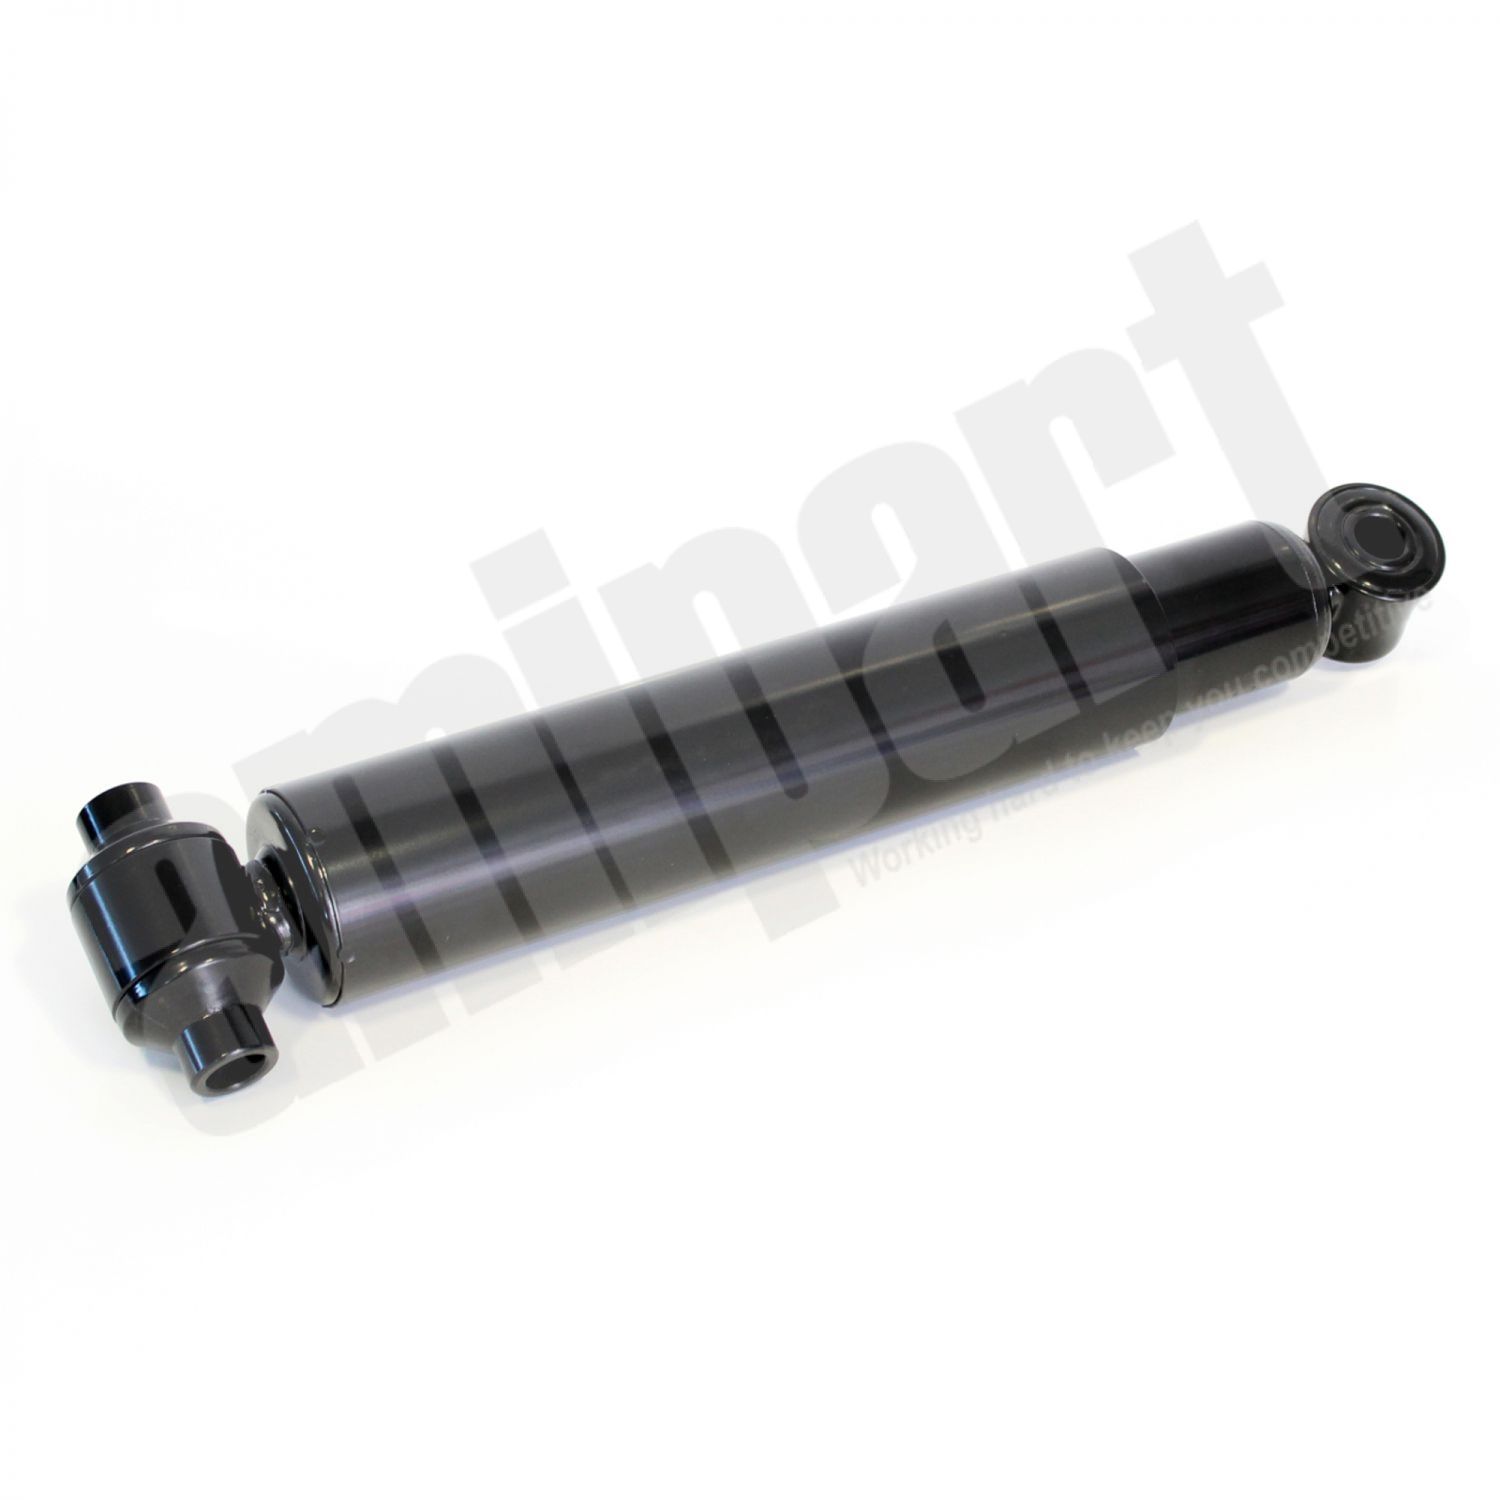 Amipart - VOLVO FM/FH SHOCK ABSORBER